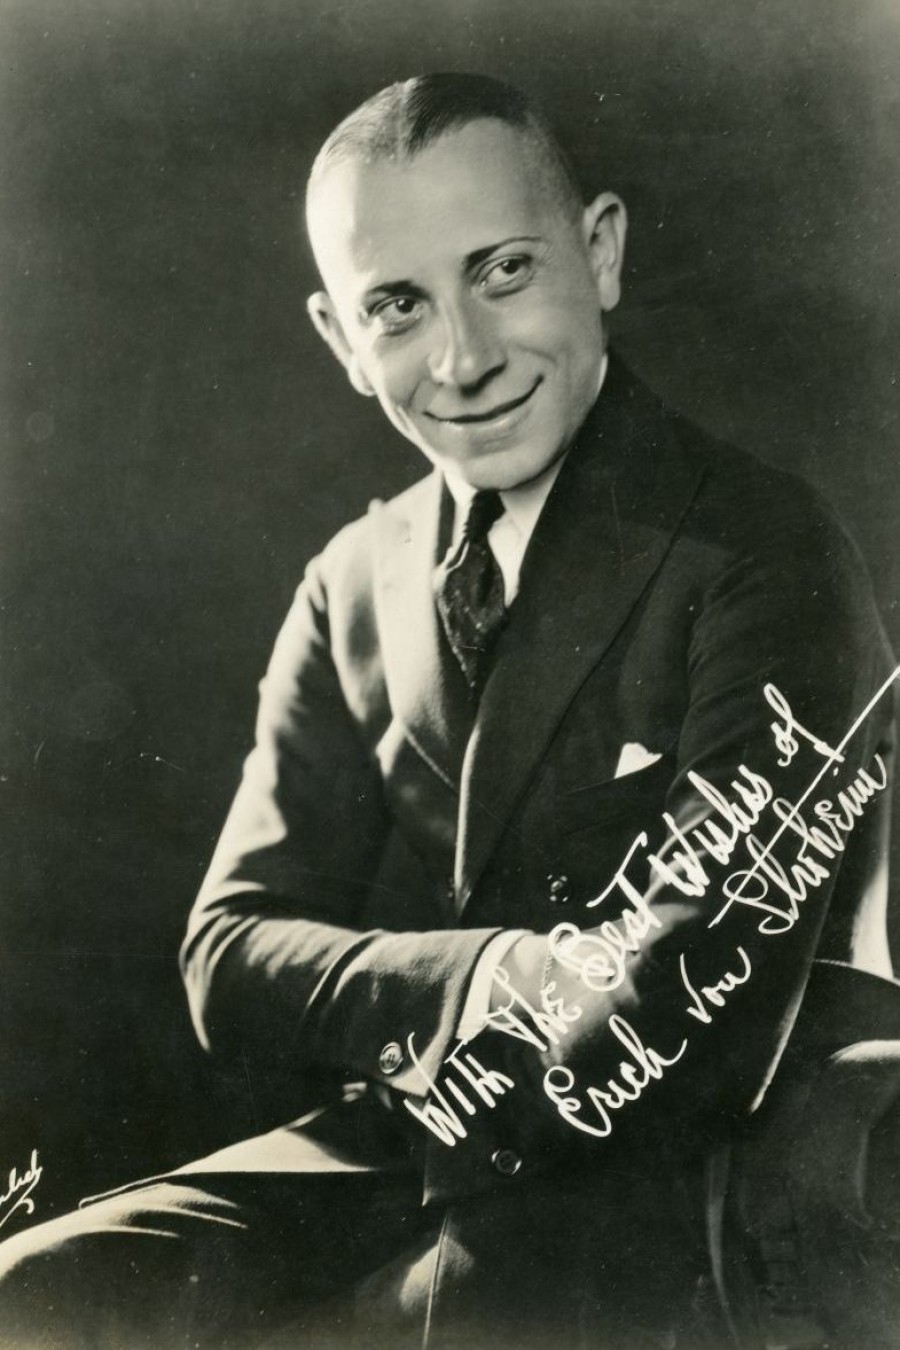 Signed portrait as a Universal star, 1919-1923